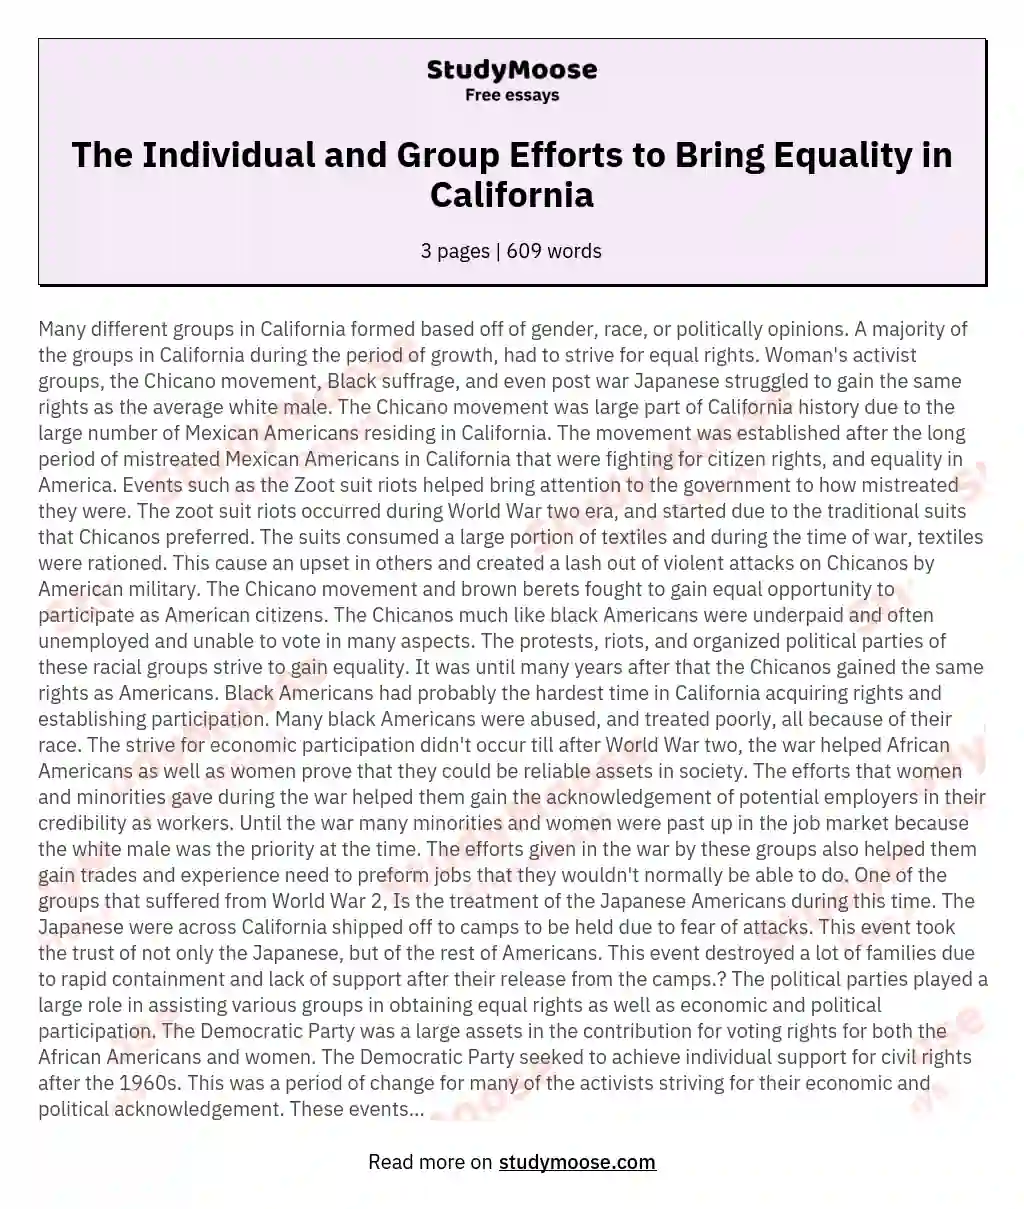 The Individual and Group Efforts to Bring Equality in California essay